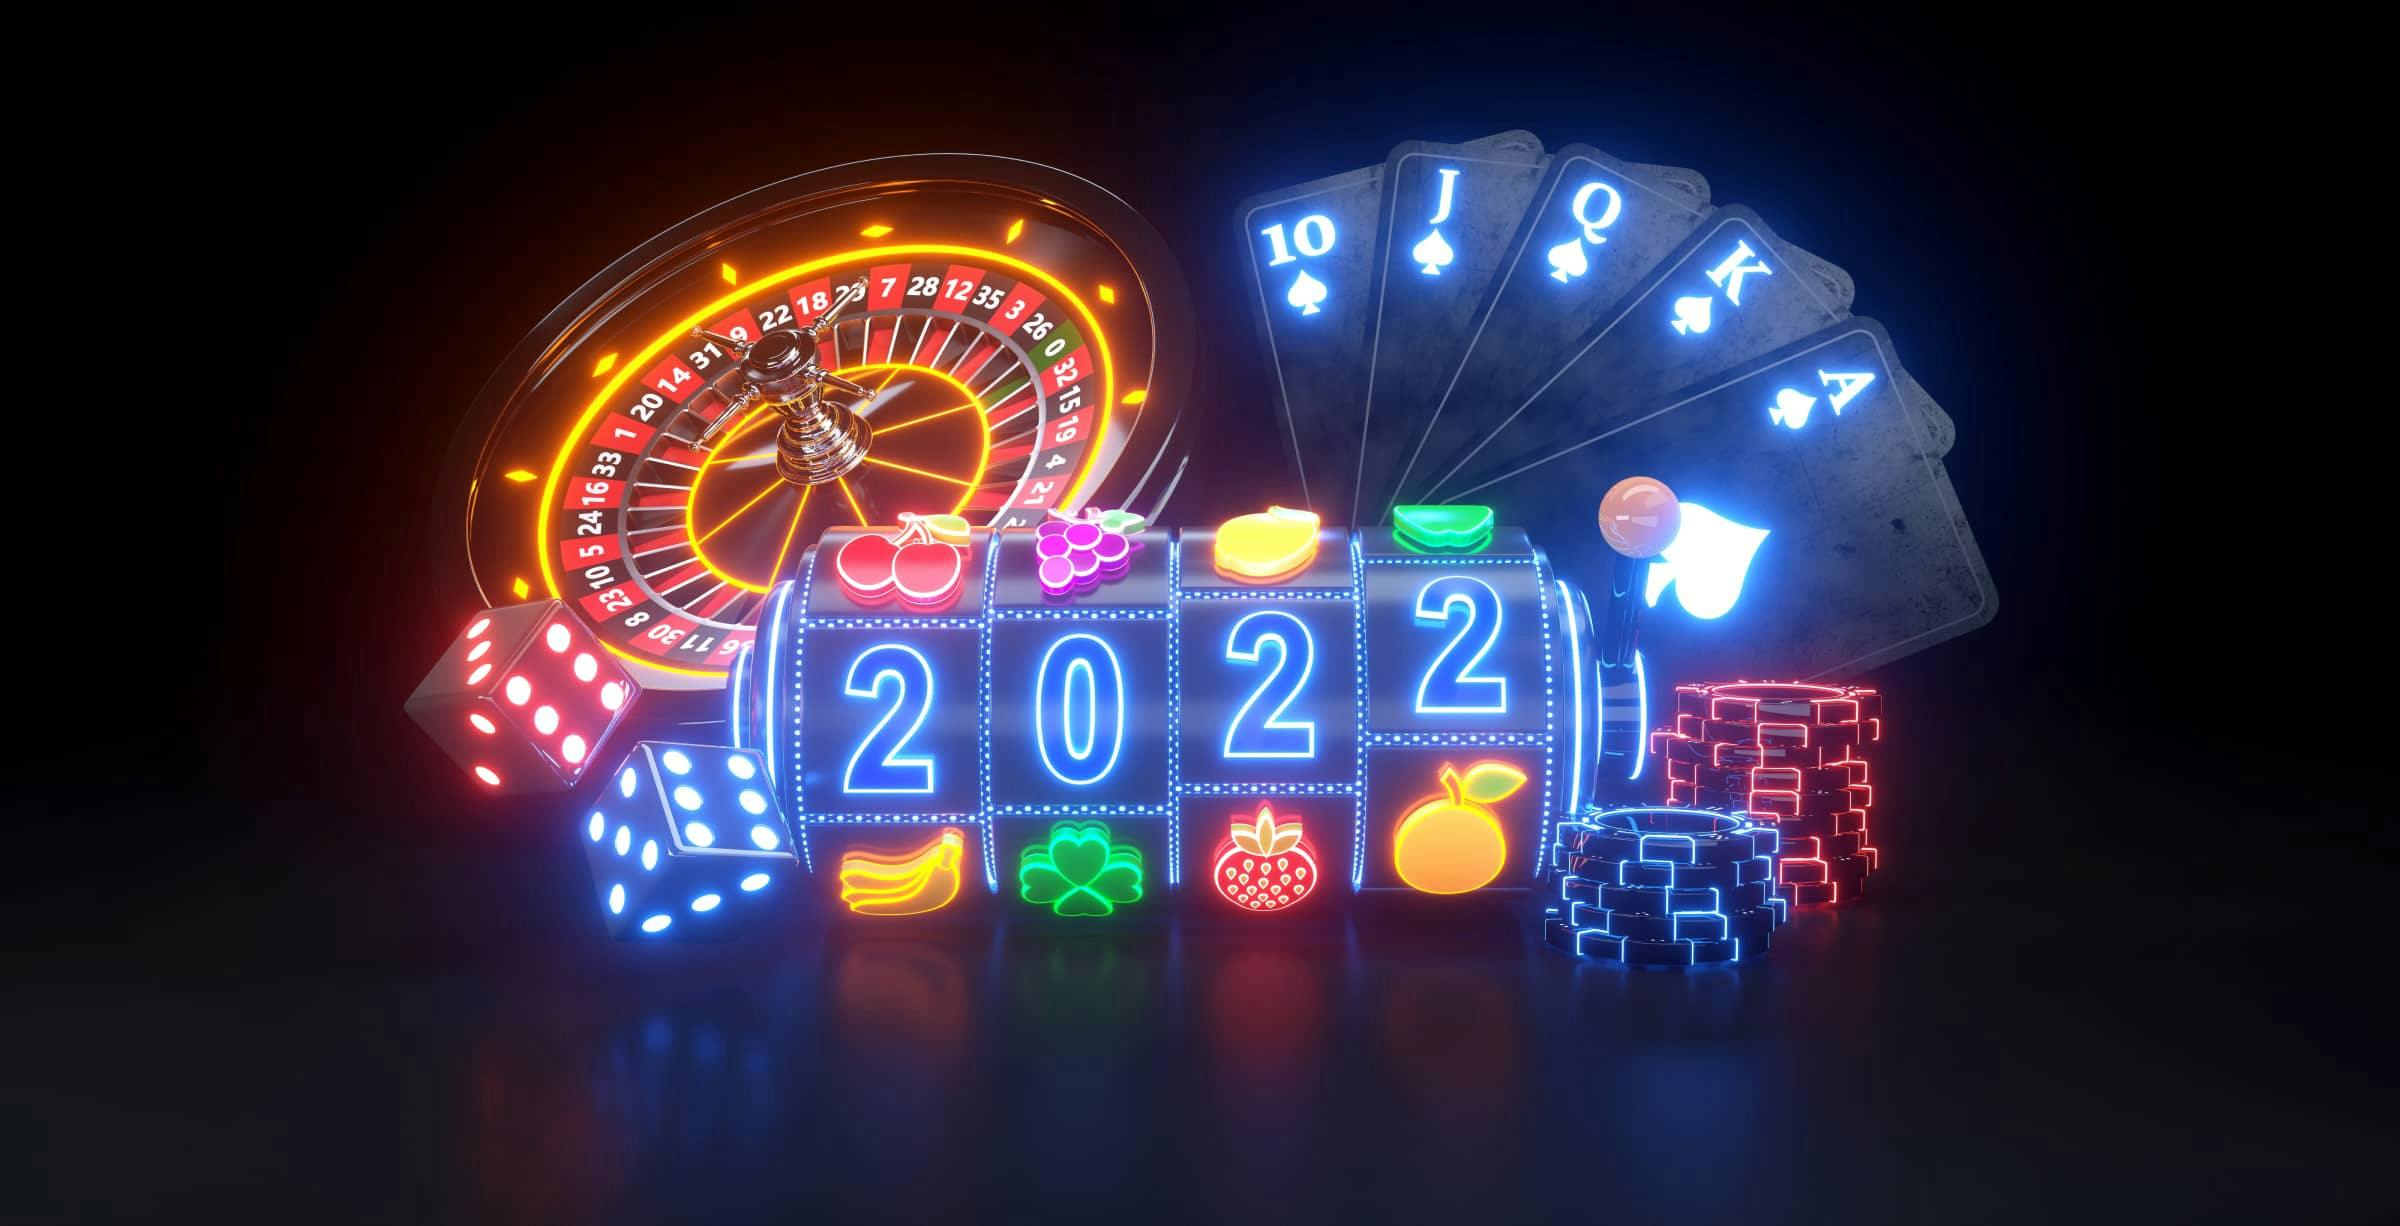 Top Casino Games to Play in 2022